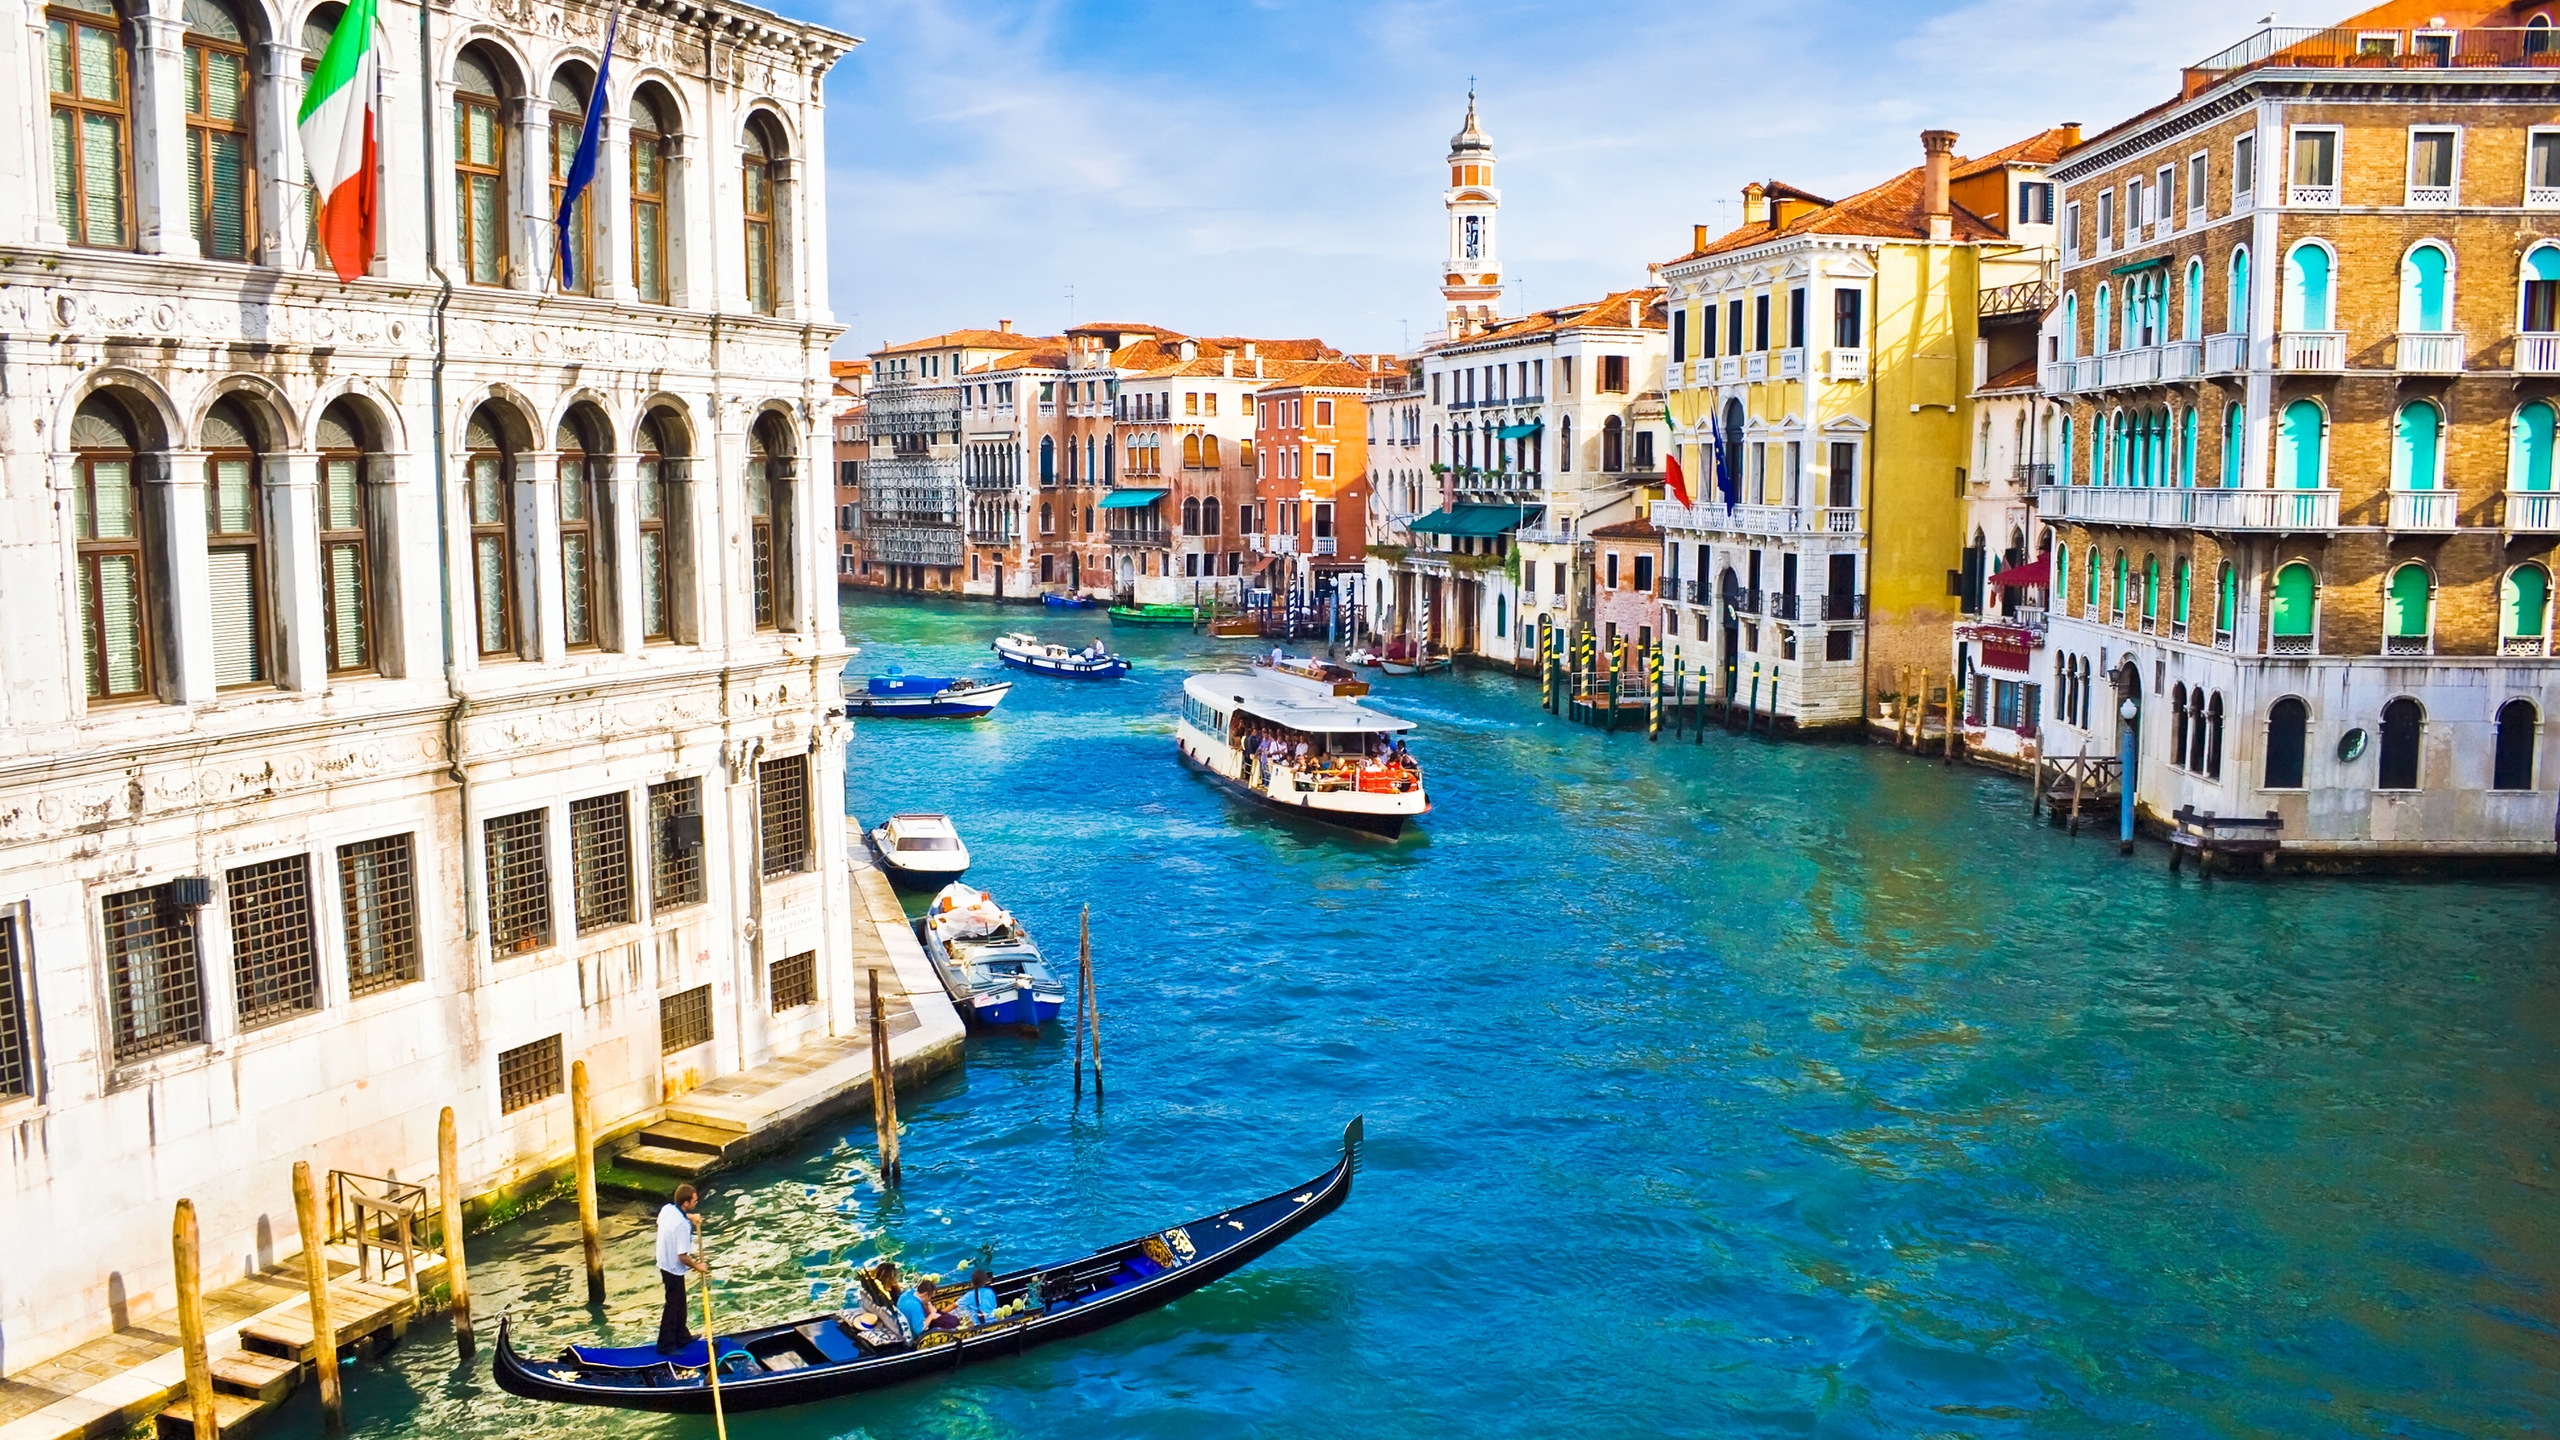 Beautiful Venice Canal for 2560x1440 HDTV resolution